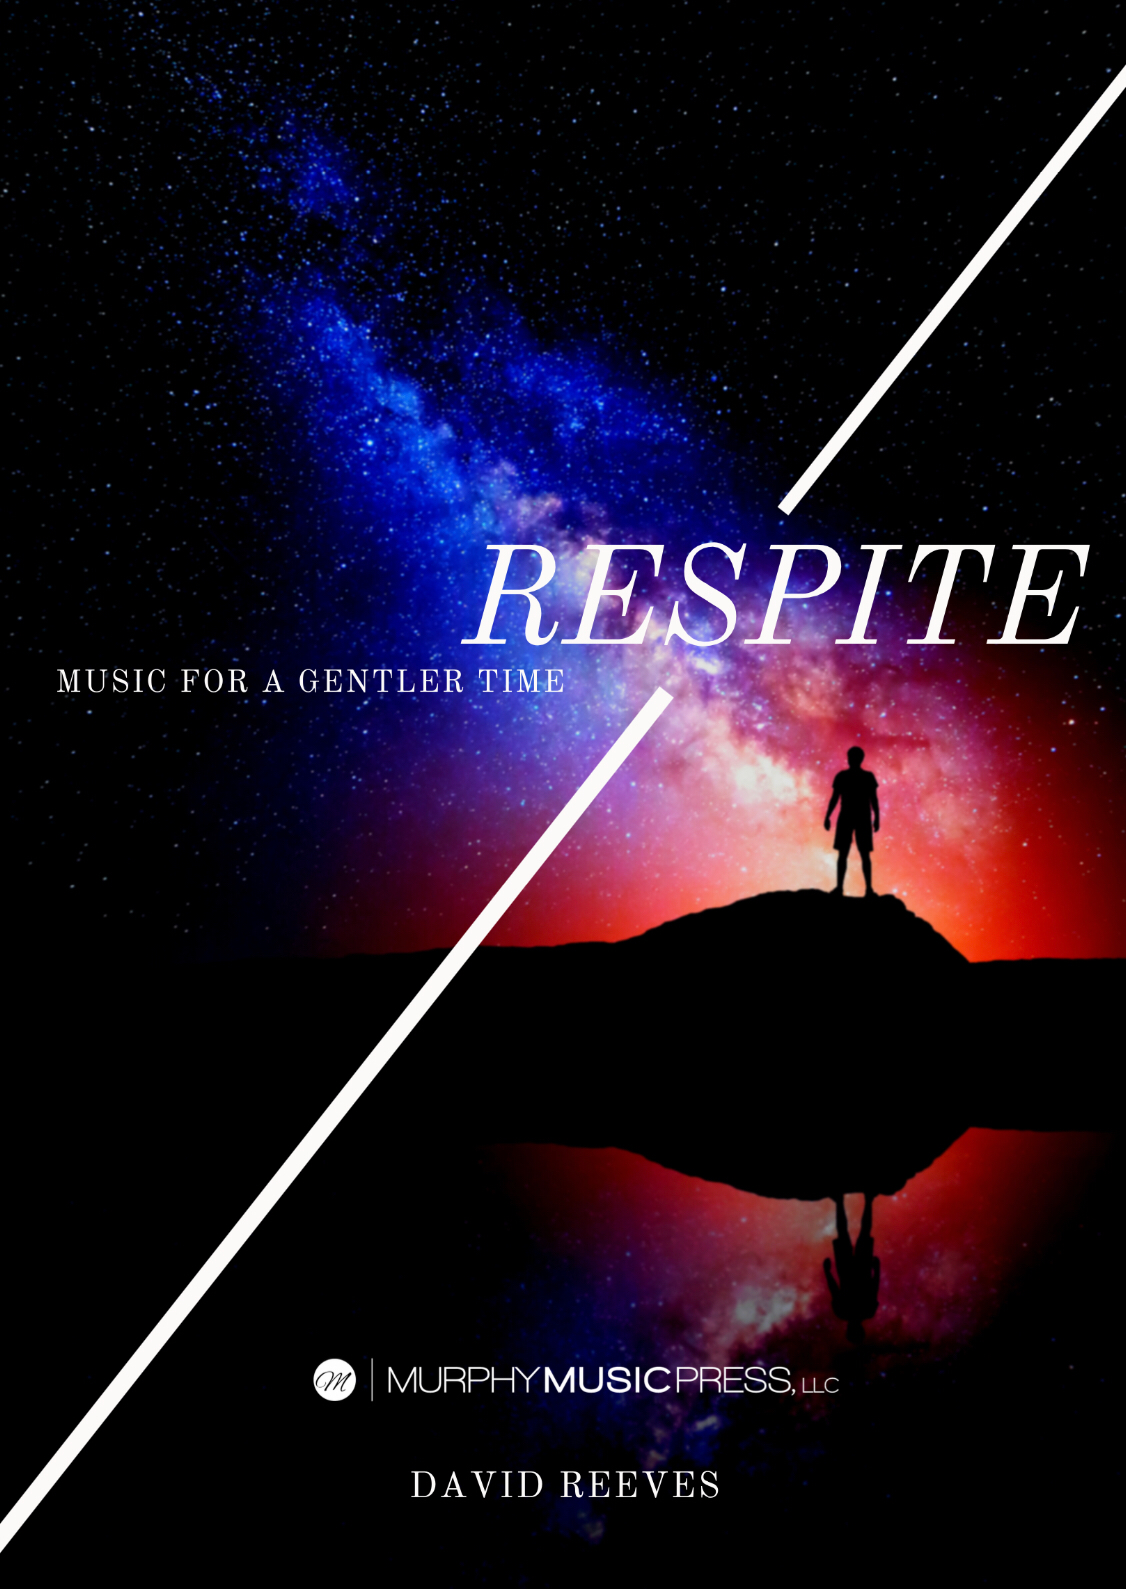 Respite (Score Only) by David Reeves